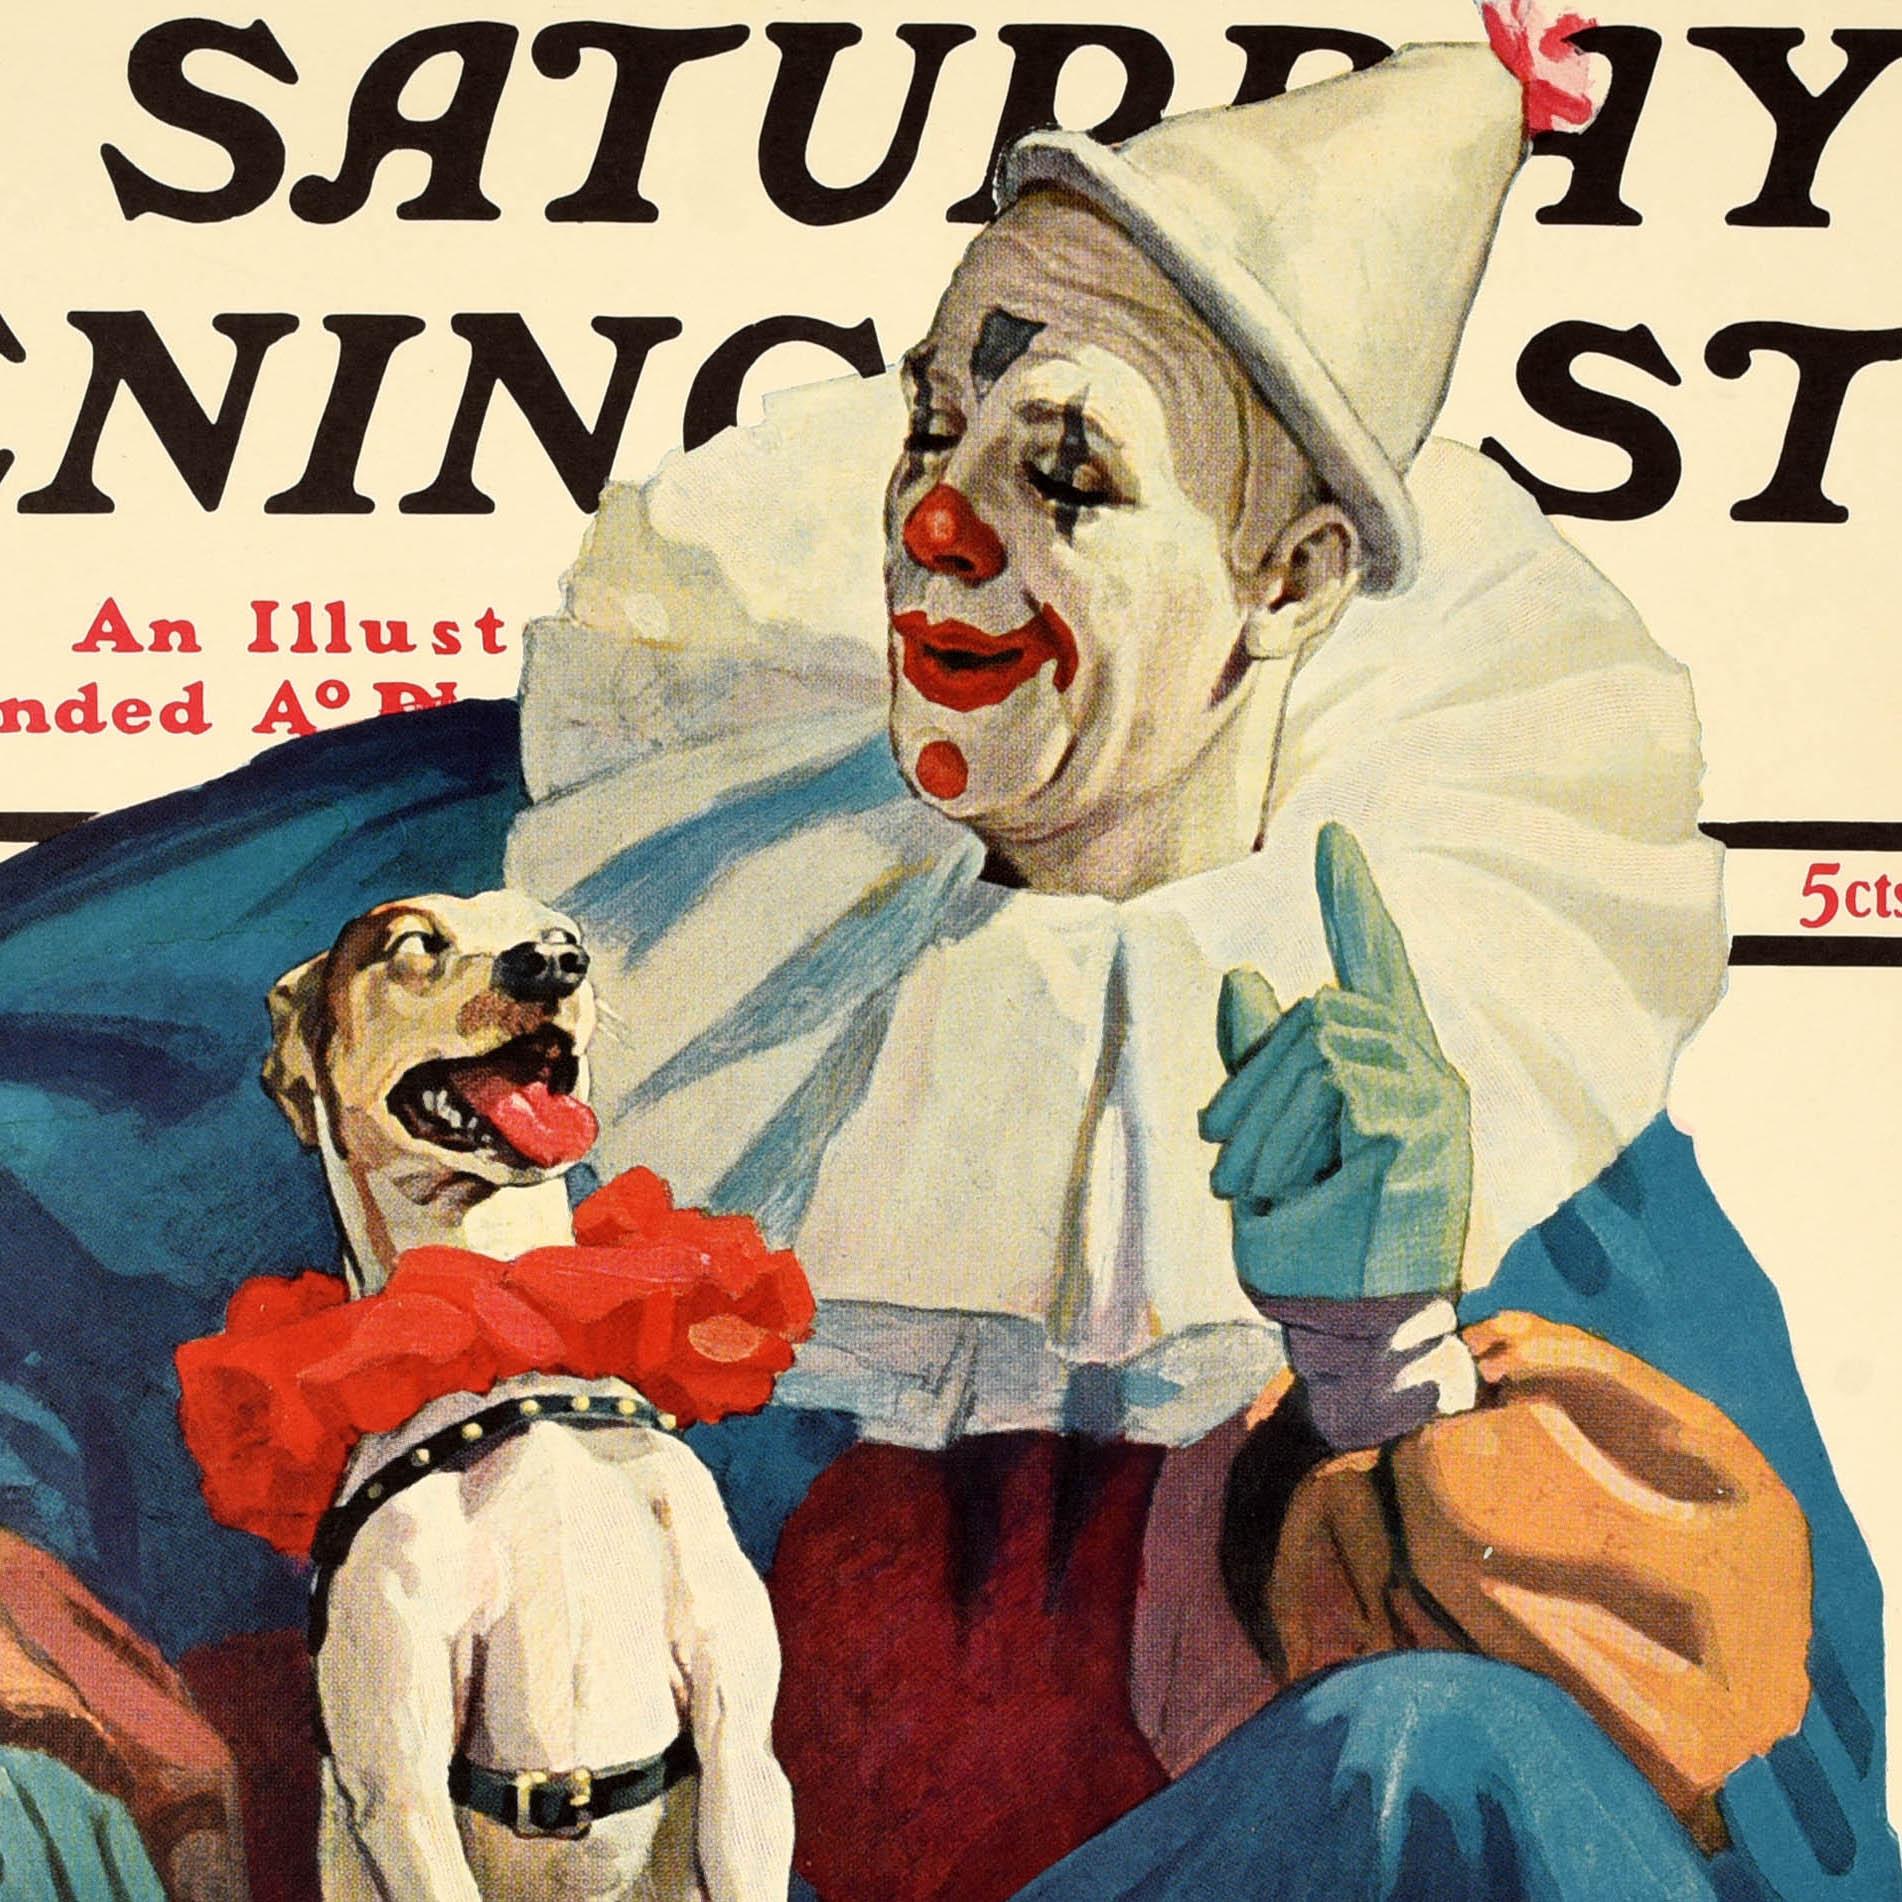 Original vintage advertising poster for the 3 June 1939 issue of The Saturday Evening Post illustrated magazine featuring a clown in a blue and red polka dot outfit teaching a dog tricks on a white and red star stool, the title text above and book